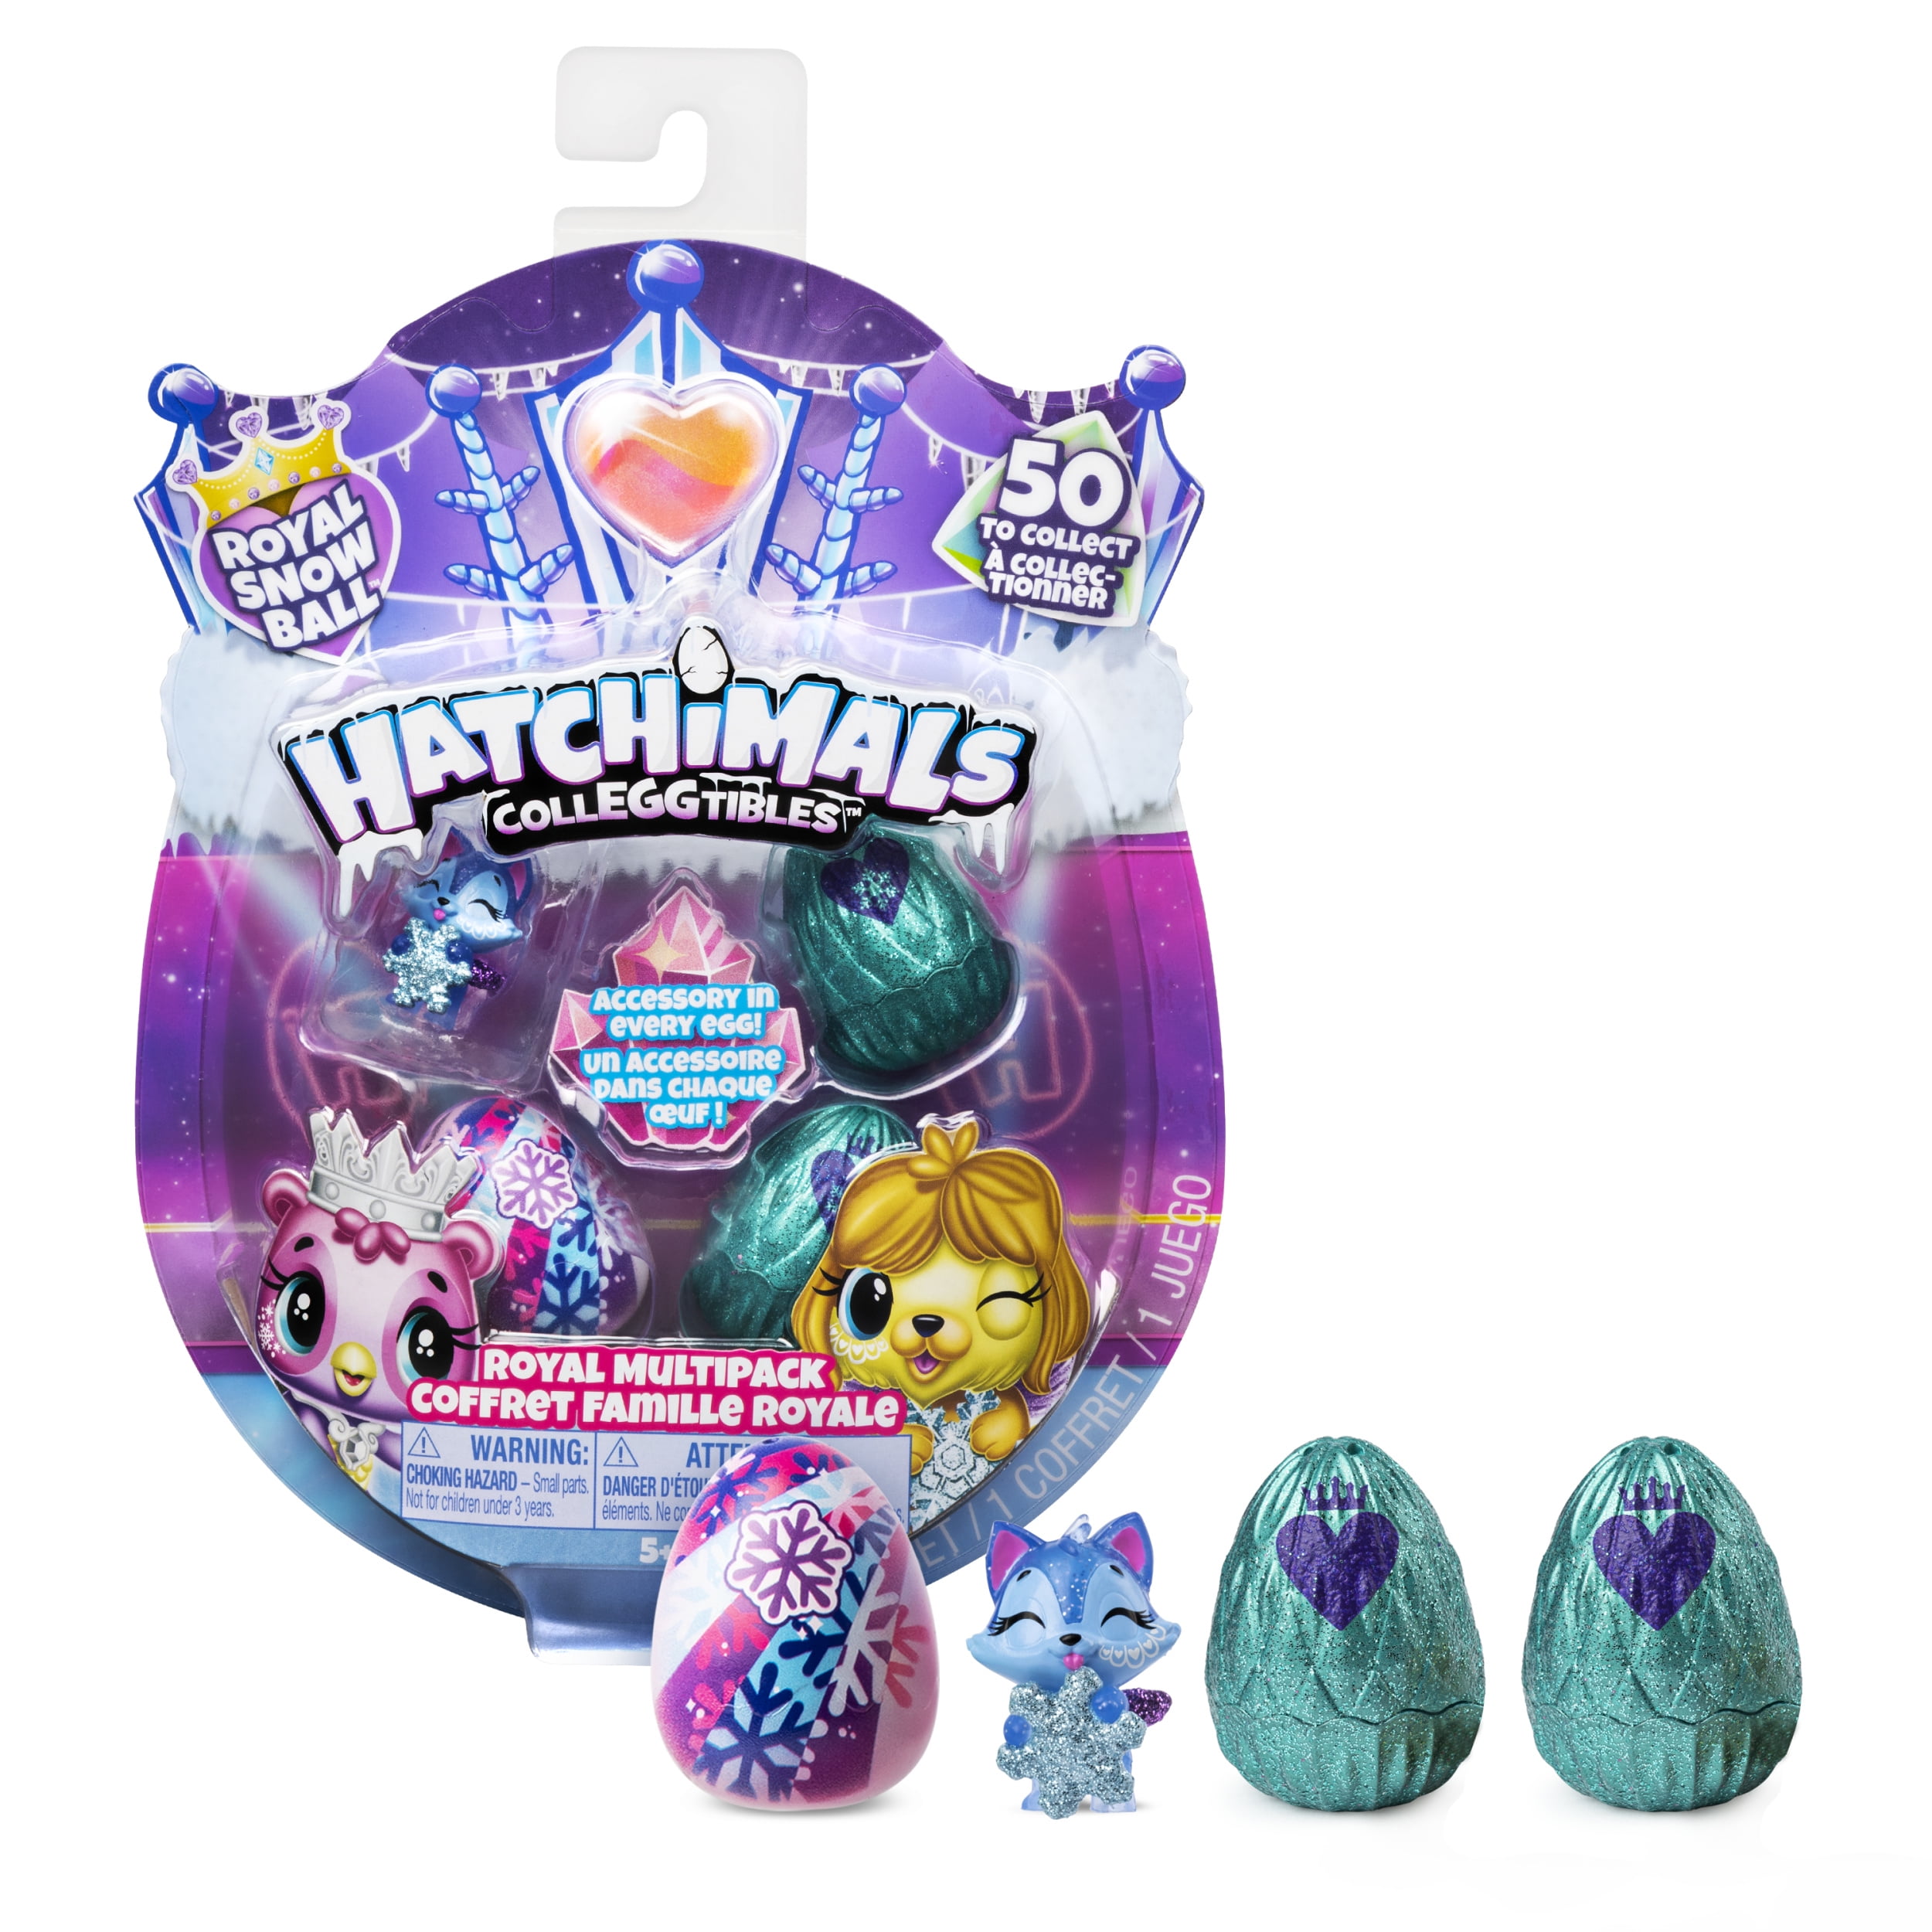 Random pack supplied Style may vary Hatchimals Series 1 Colleggtibles with Nest 